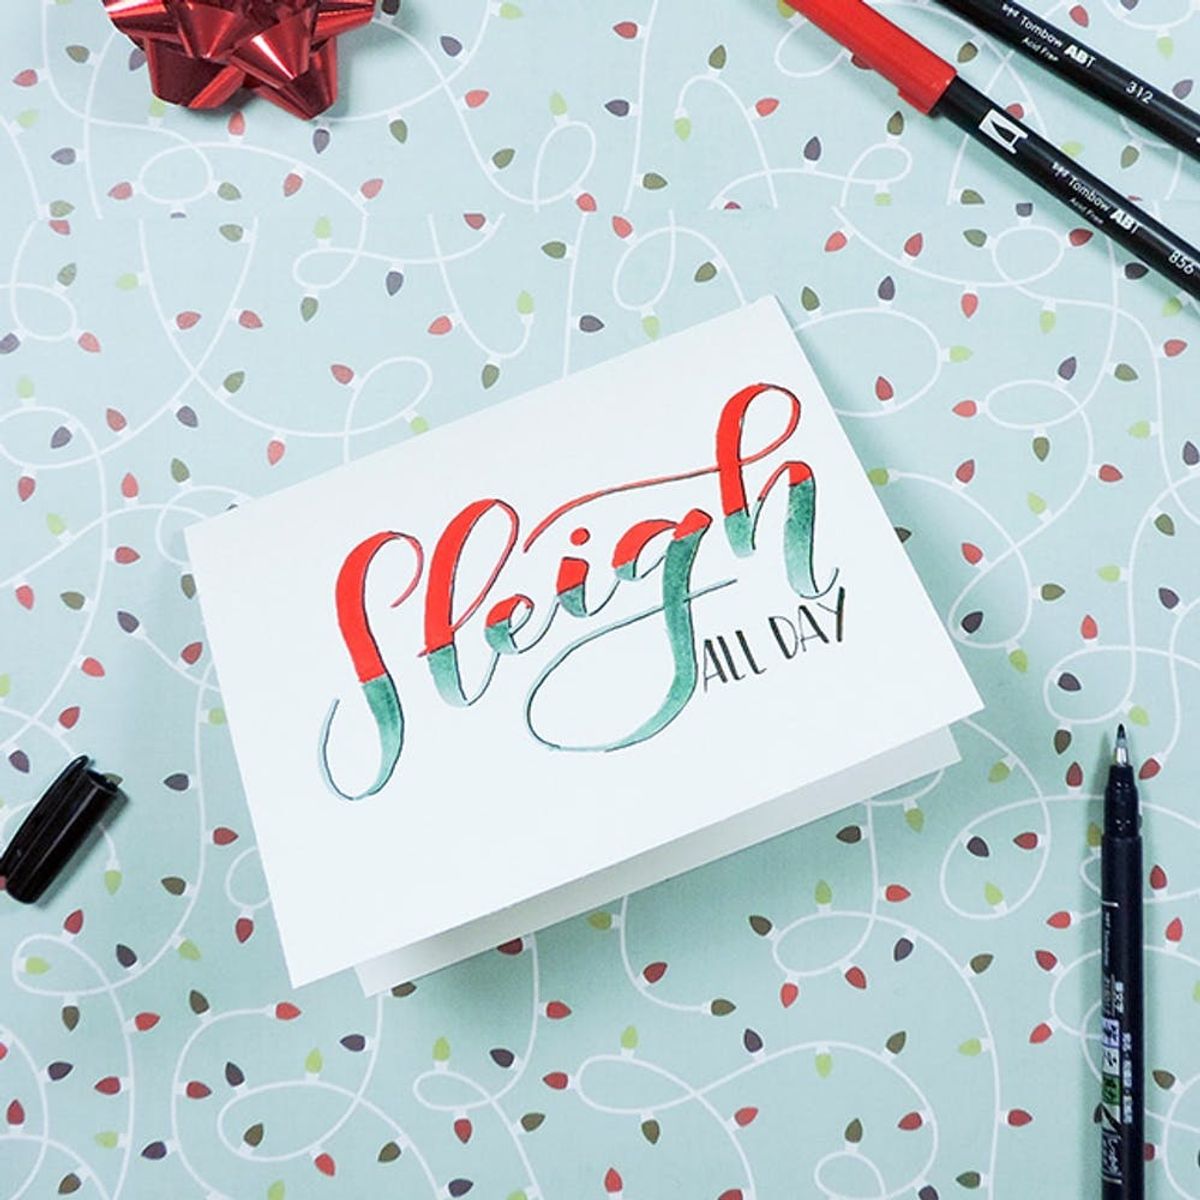 Sleigh All Day With This FREE Hand-Lettered Holiday Card Tutorial